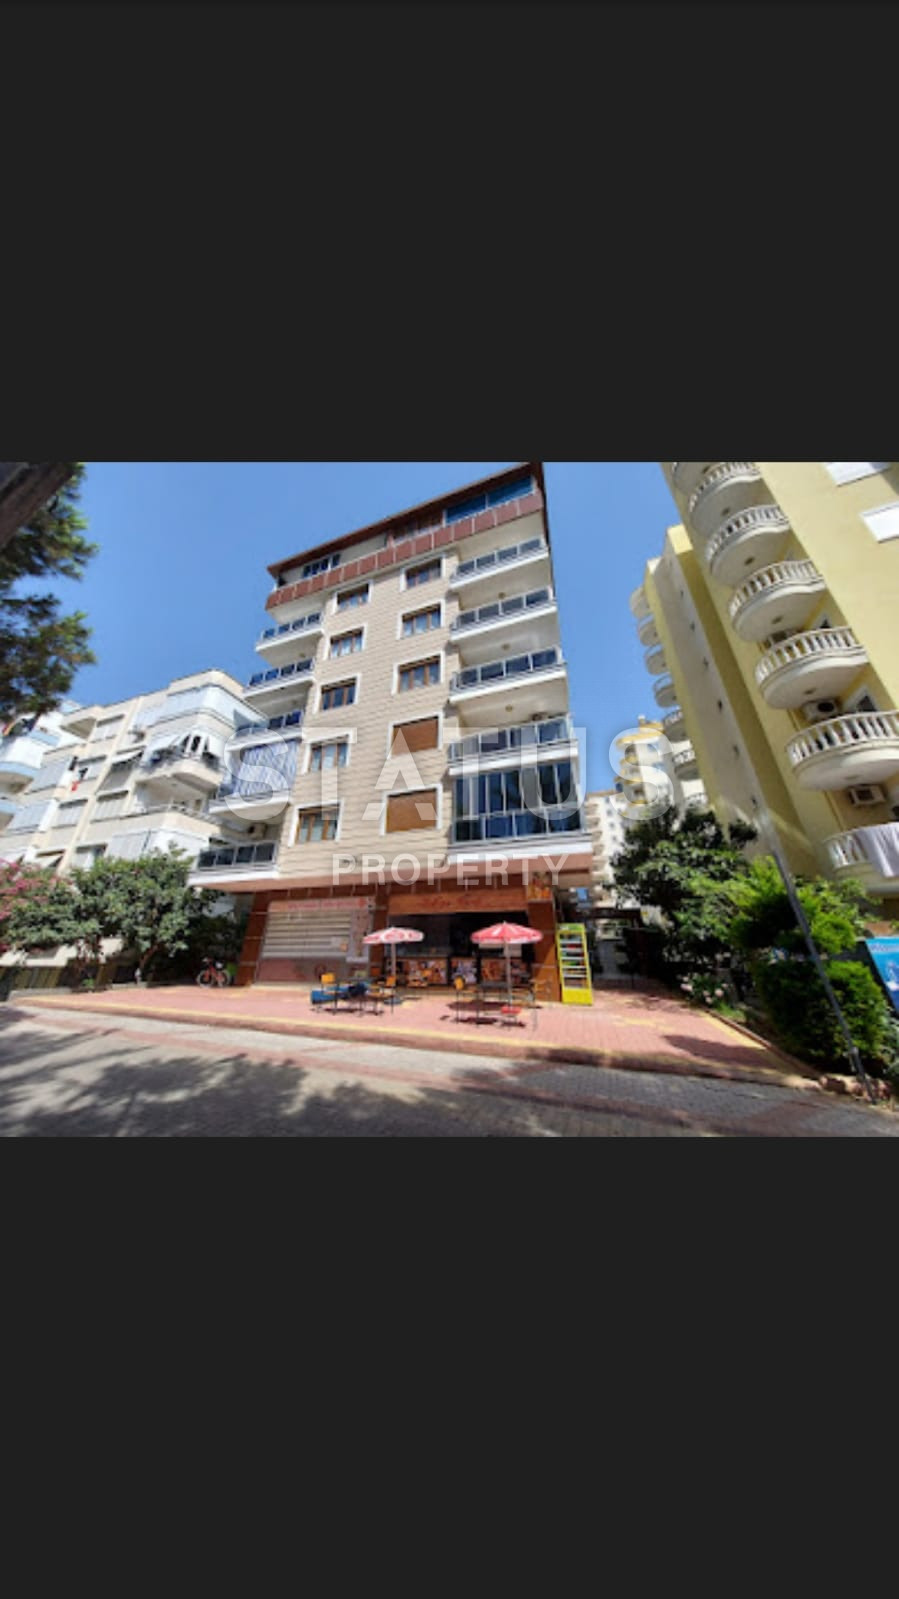 Lovely furnished apartment in a complex with a swimming pool. 70 sq.m. фото 1